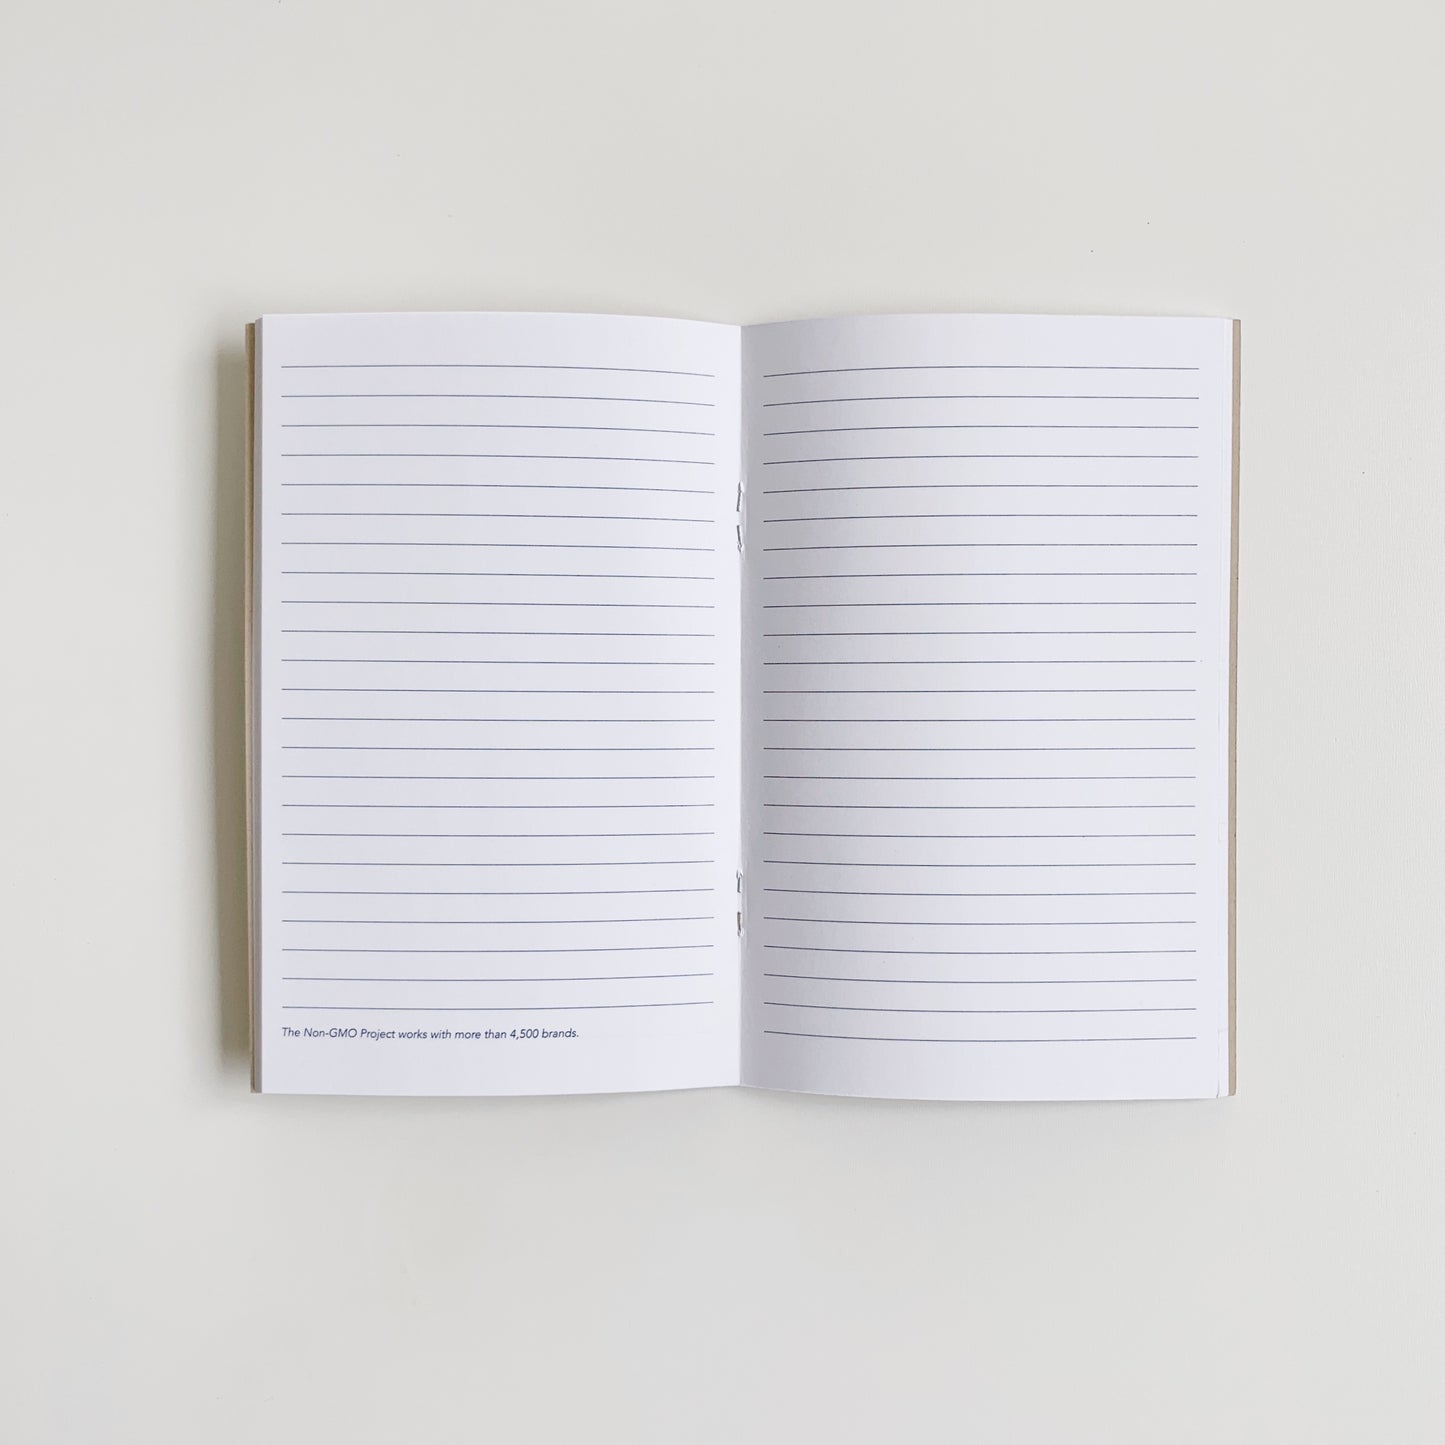 Non-GMO Project notebook open with lined pages